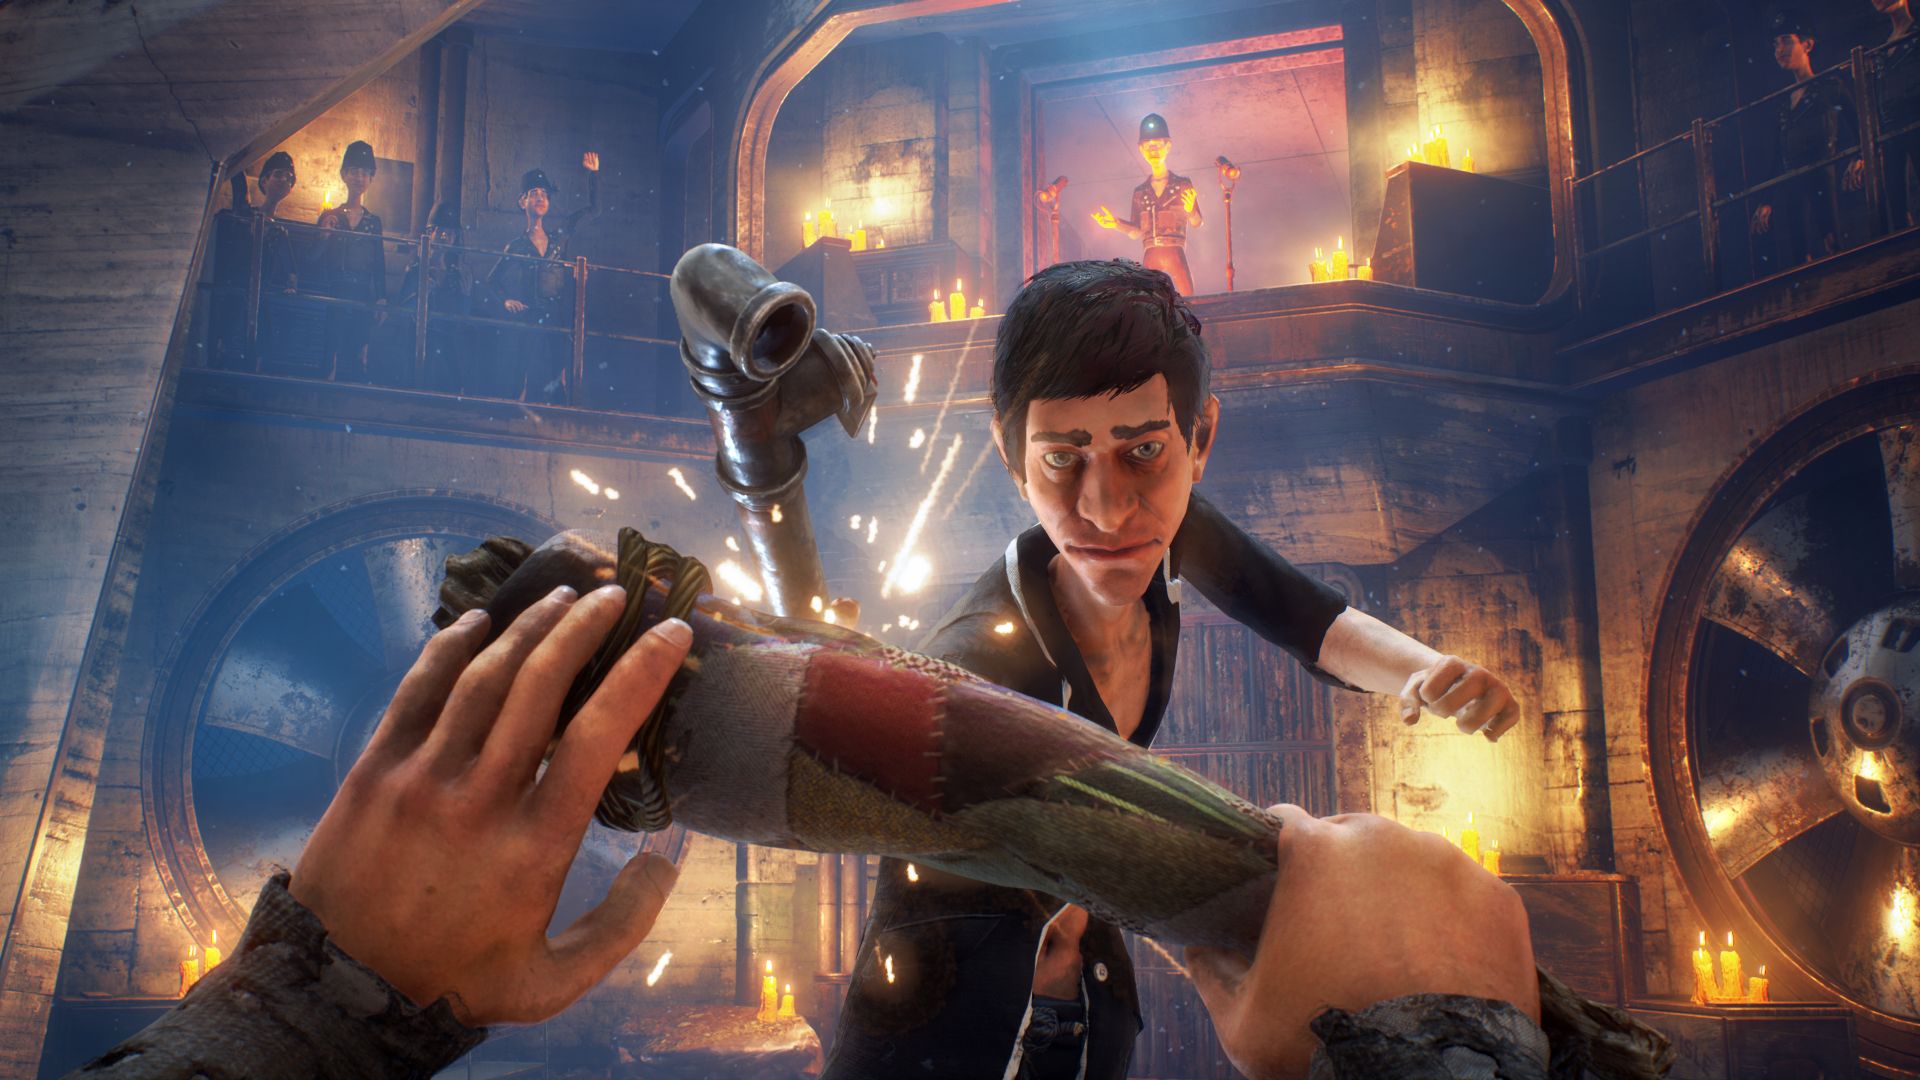 A character lunges at you with a pipe in We Happy Few.